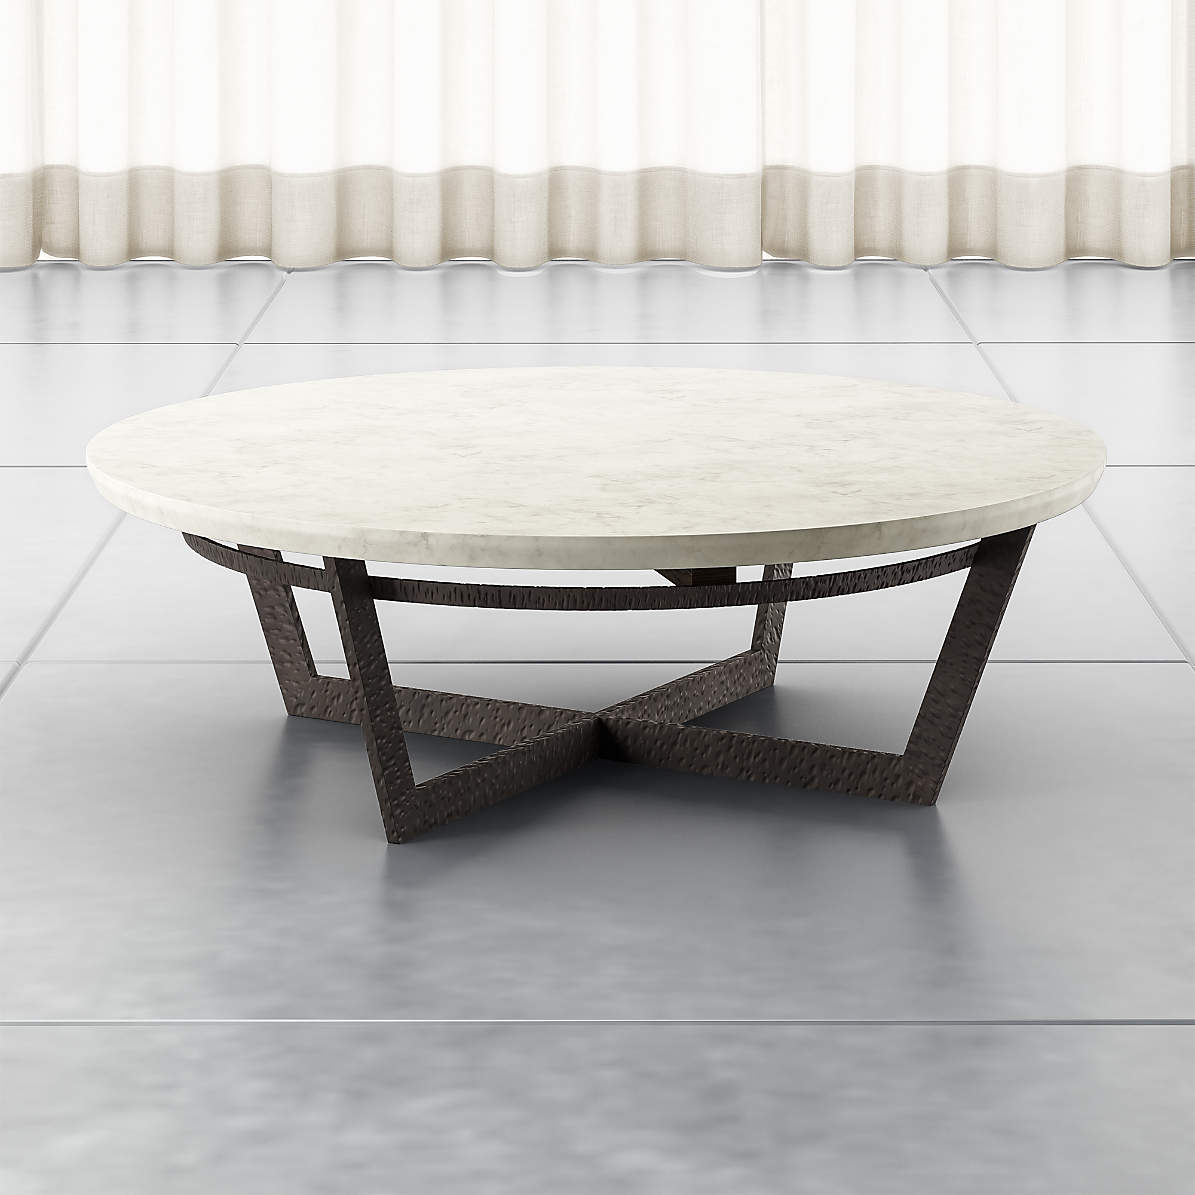 Verdad Round White Marble Coffee Table, Round White Side Table With Storage